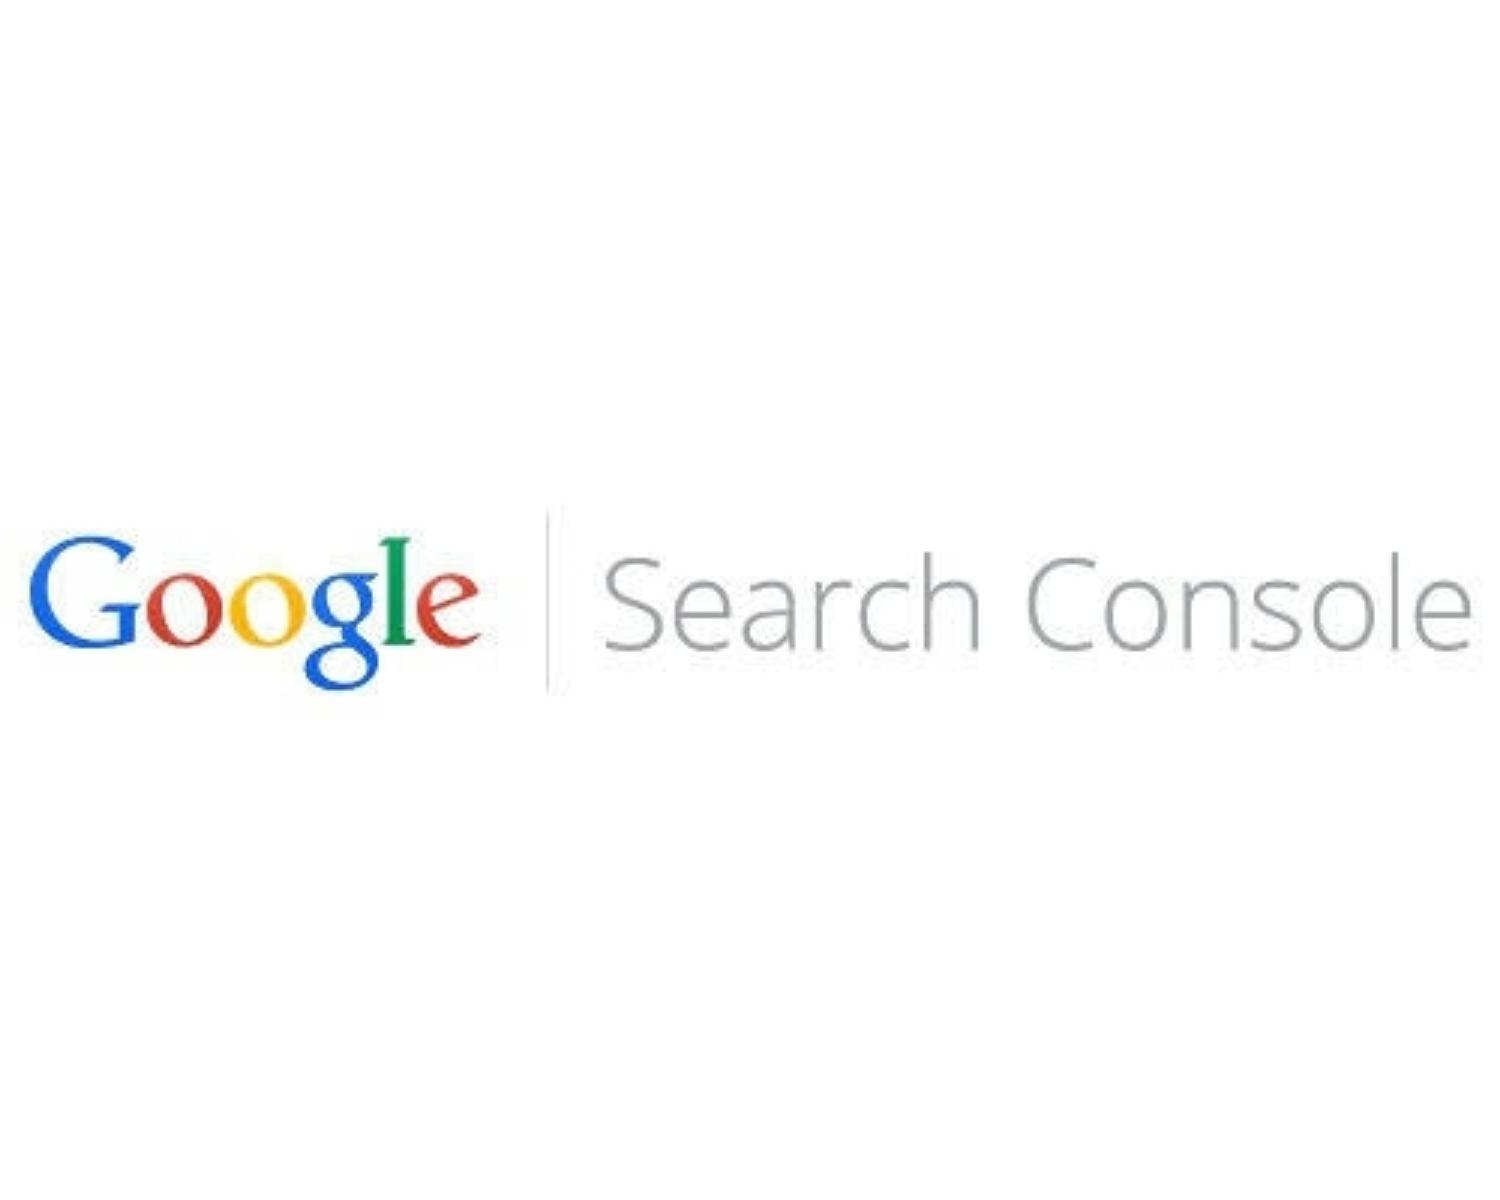 Google Search Console: The Best Analytics SEO Tool